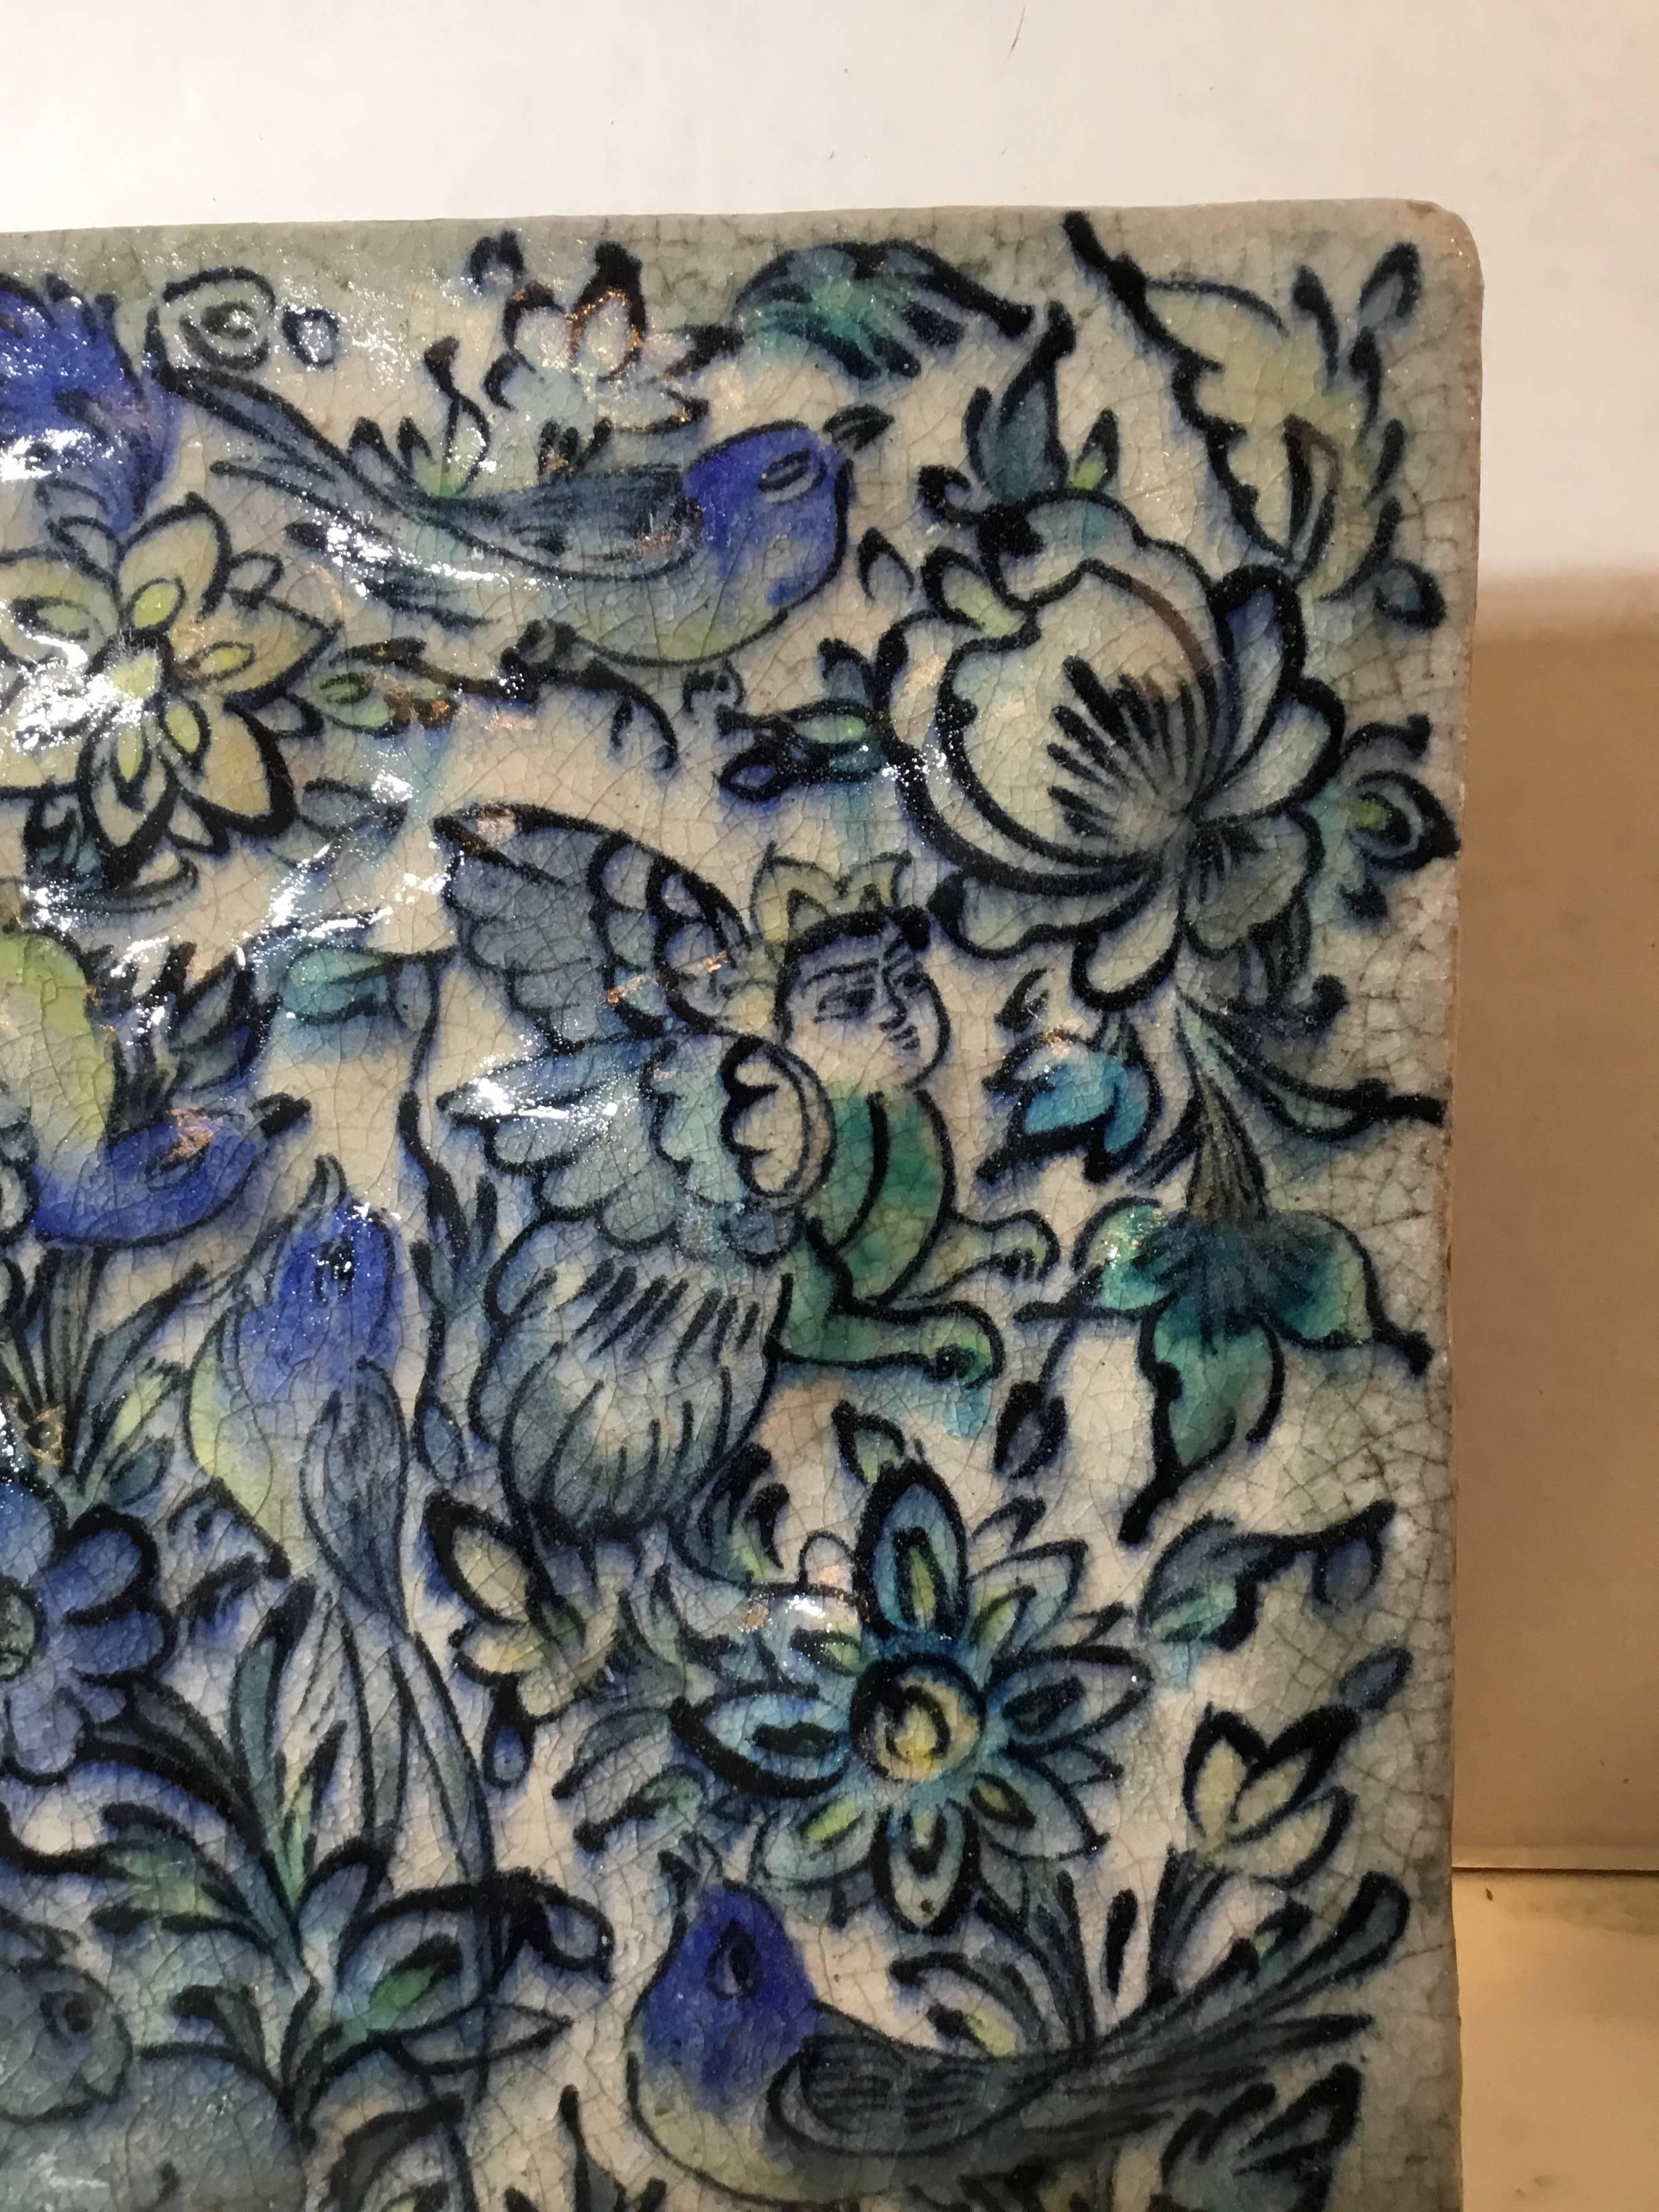 Exceptional Persian tile hand-painted and glazed with beautiful scenery of birds flying between vines and flowers, on the left bottom there is animal resting ,and in the middle of the tile there is like flying
Motif from Persian mythology that look